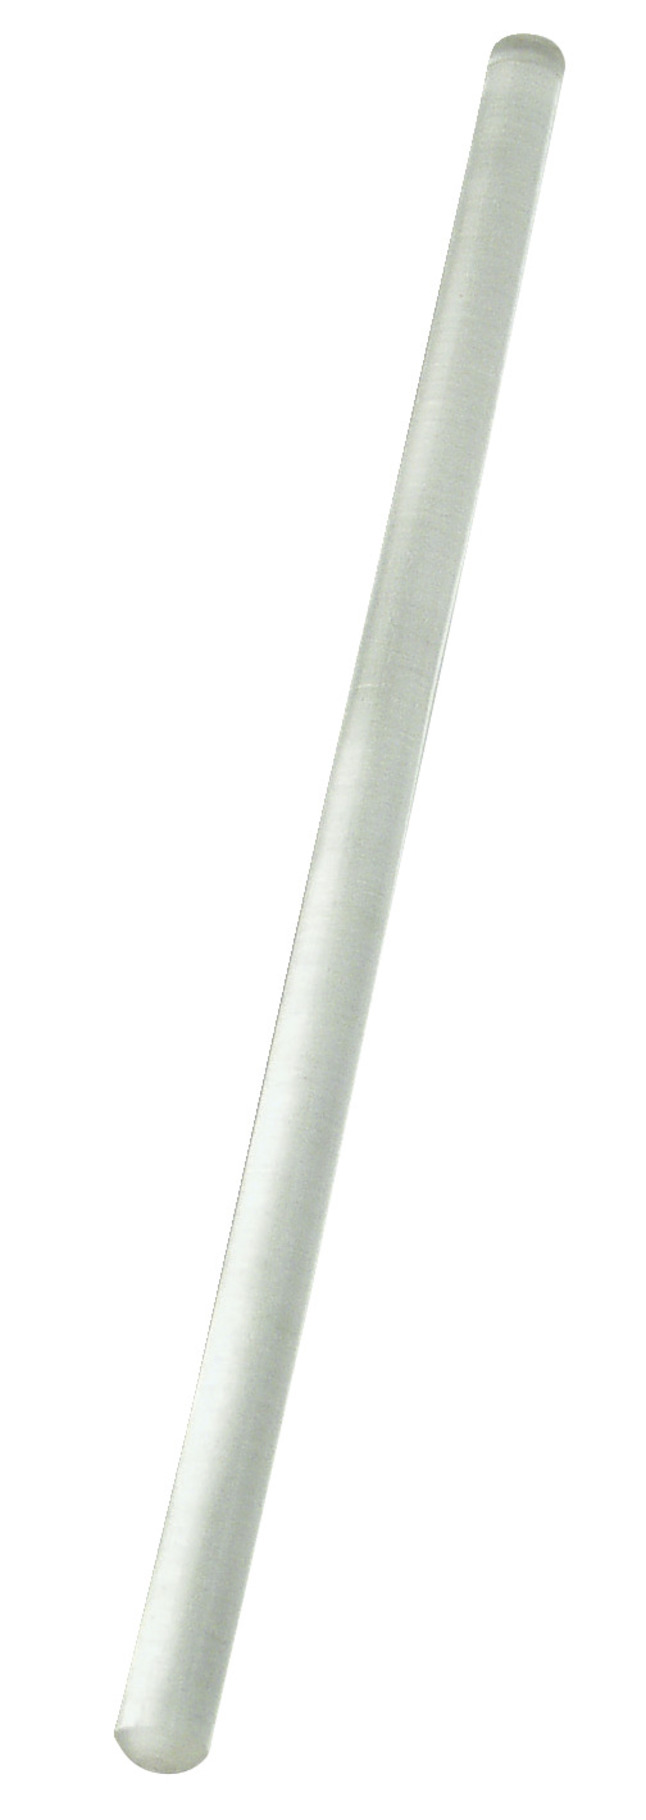 Frey Scientific Lucite Acrylic Friction Rod, Item Number 590055